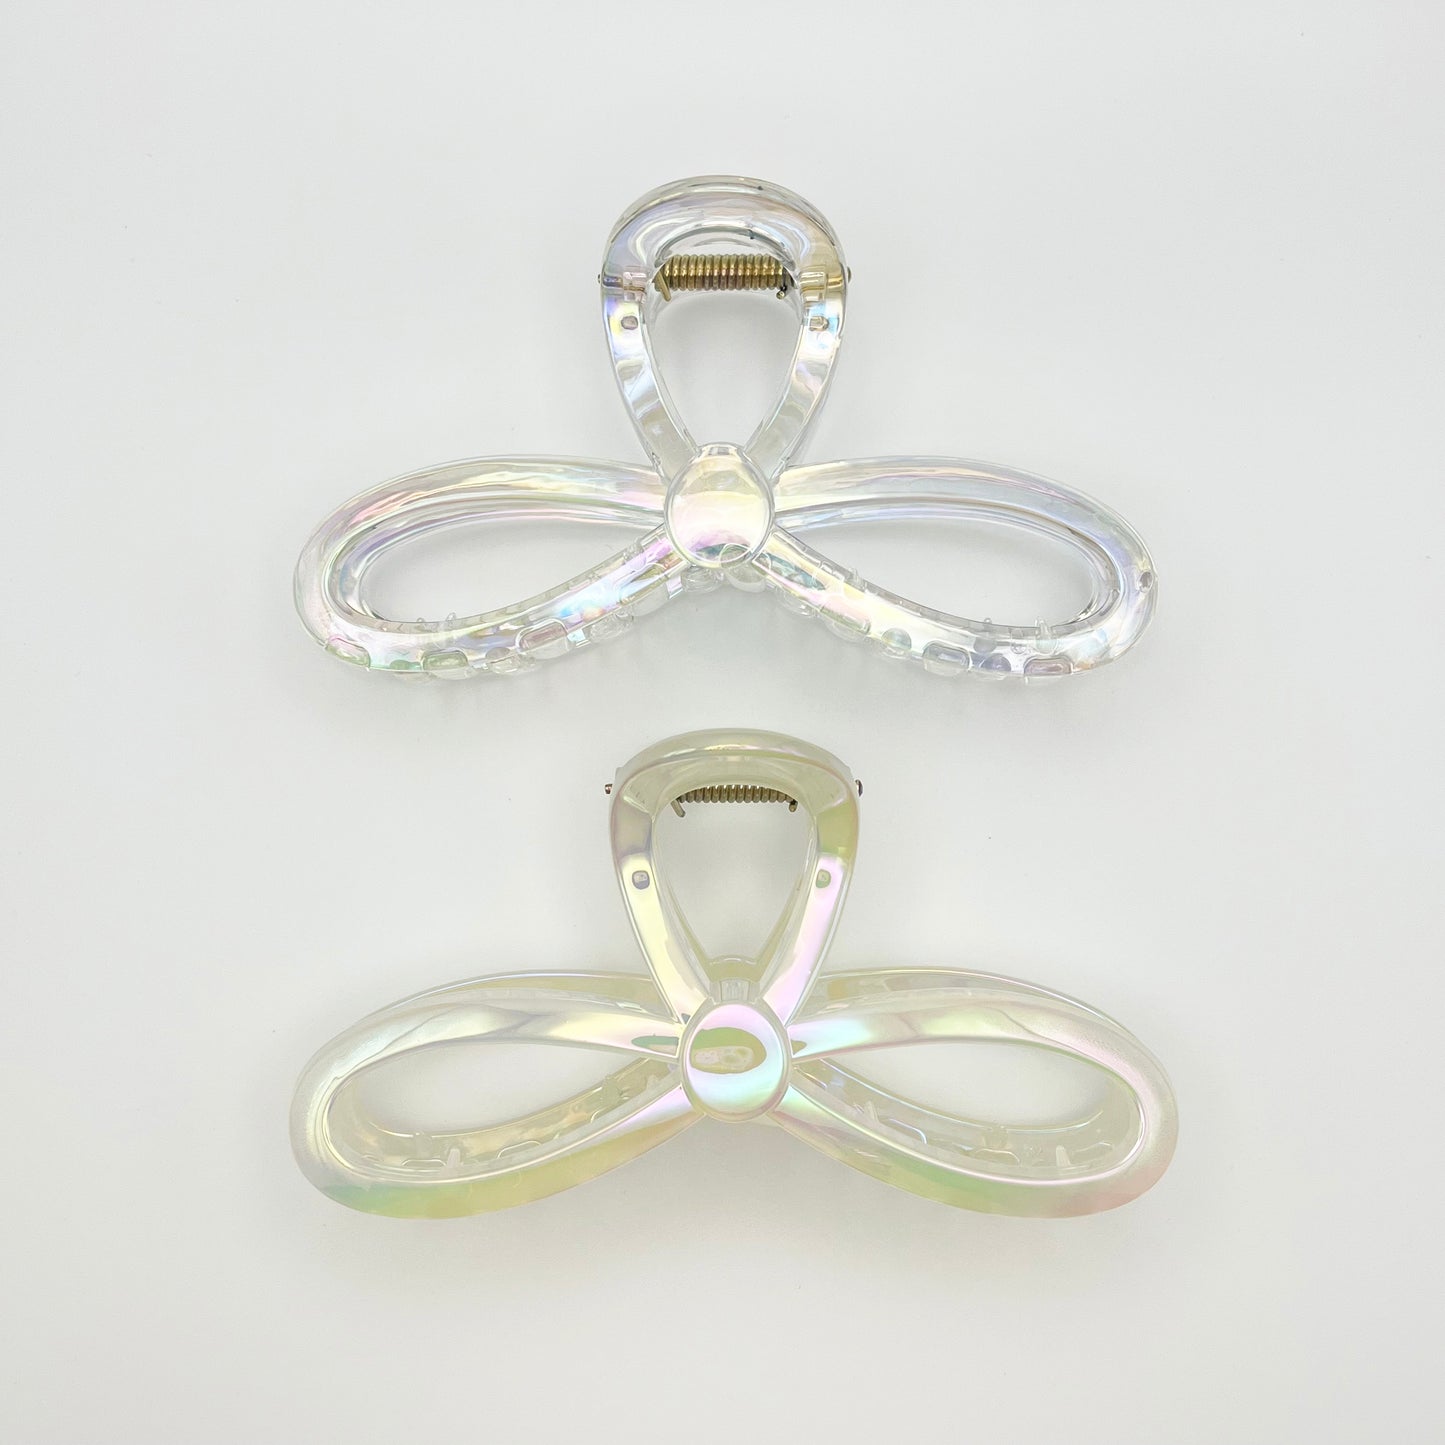 Pearly Bow Loop Claw Clip (Pearl, Iridescent)